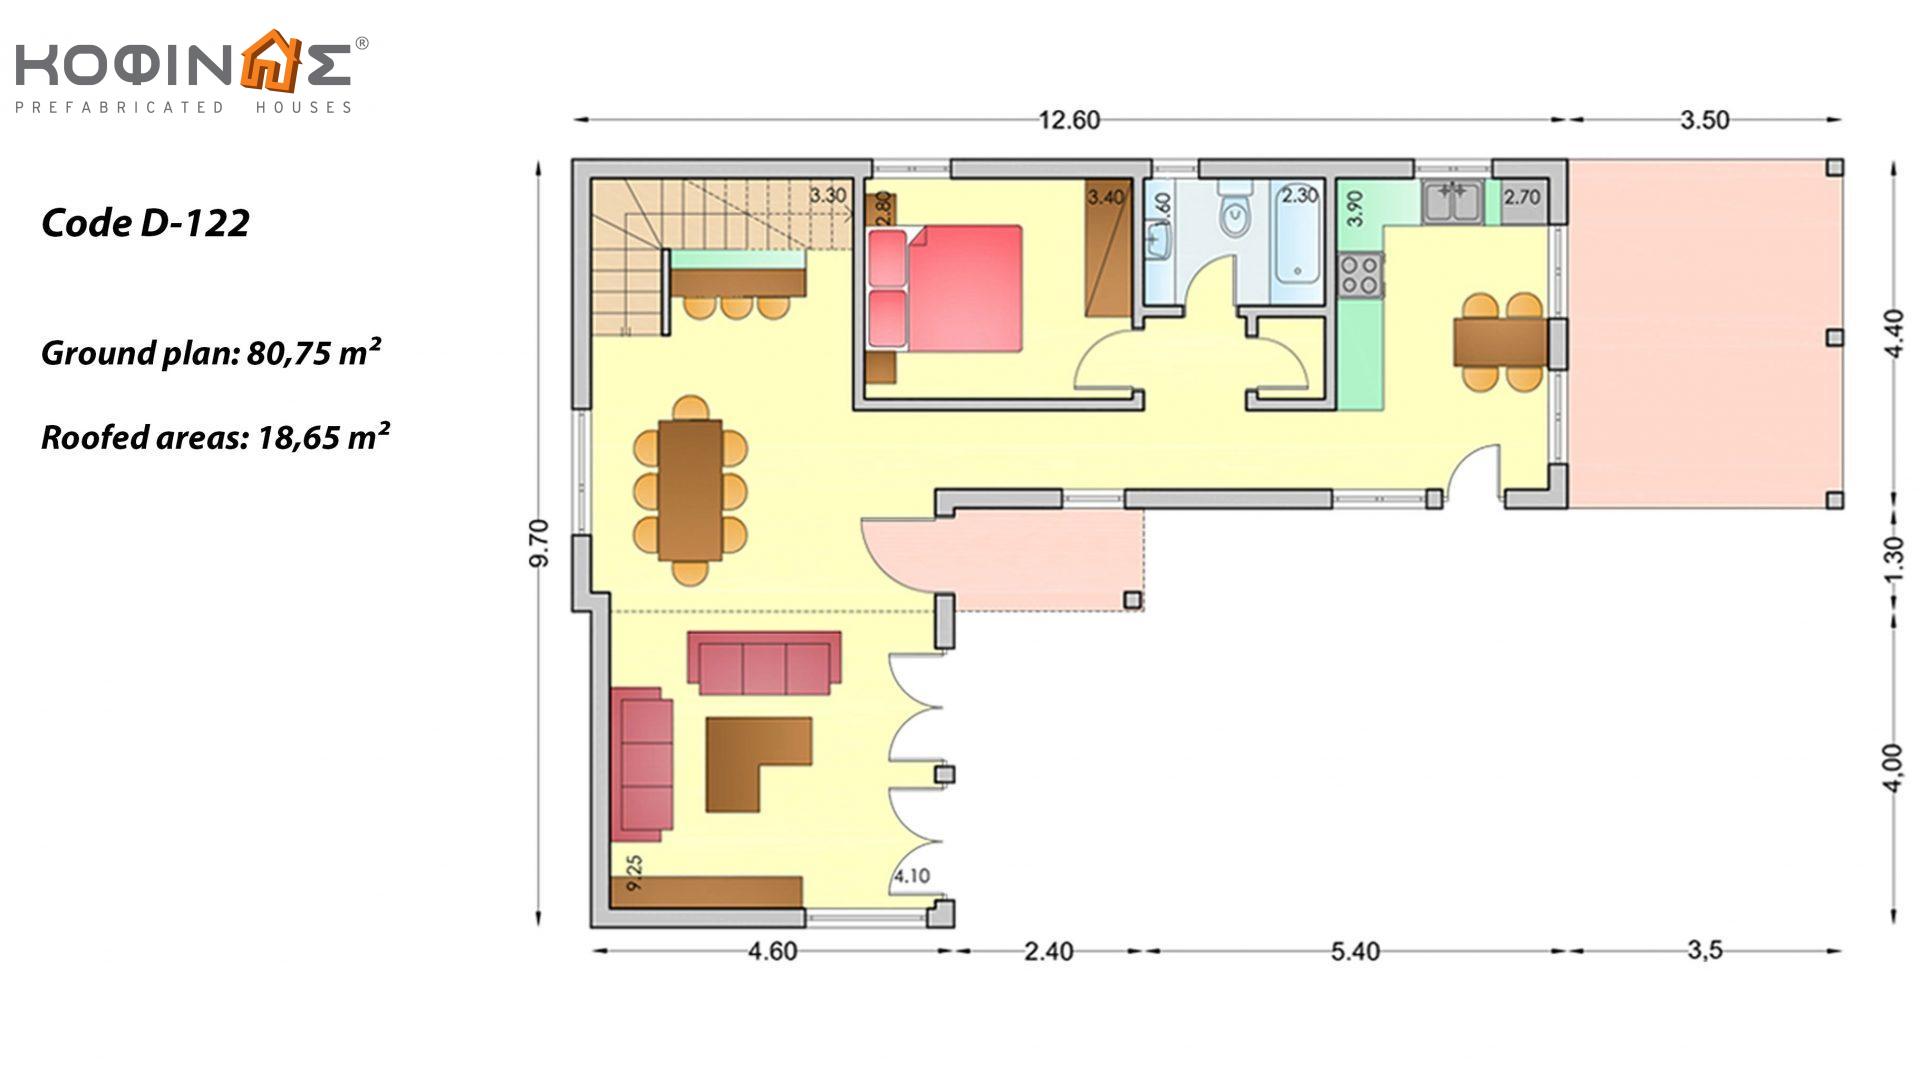 2-story house D-122, total surface of 122,60 m²,covered roofed areas 18,65 m²,balconies 42,16 m²